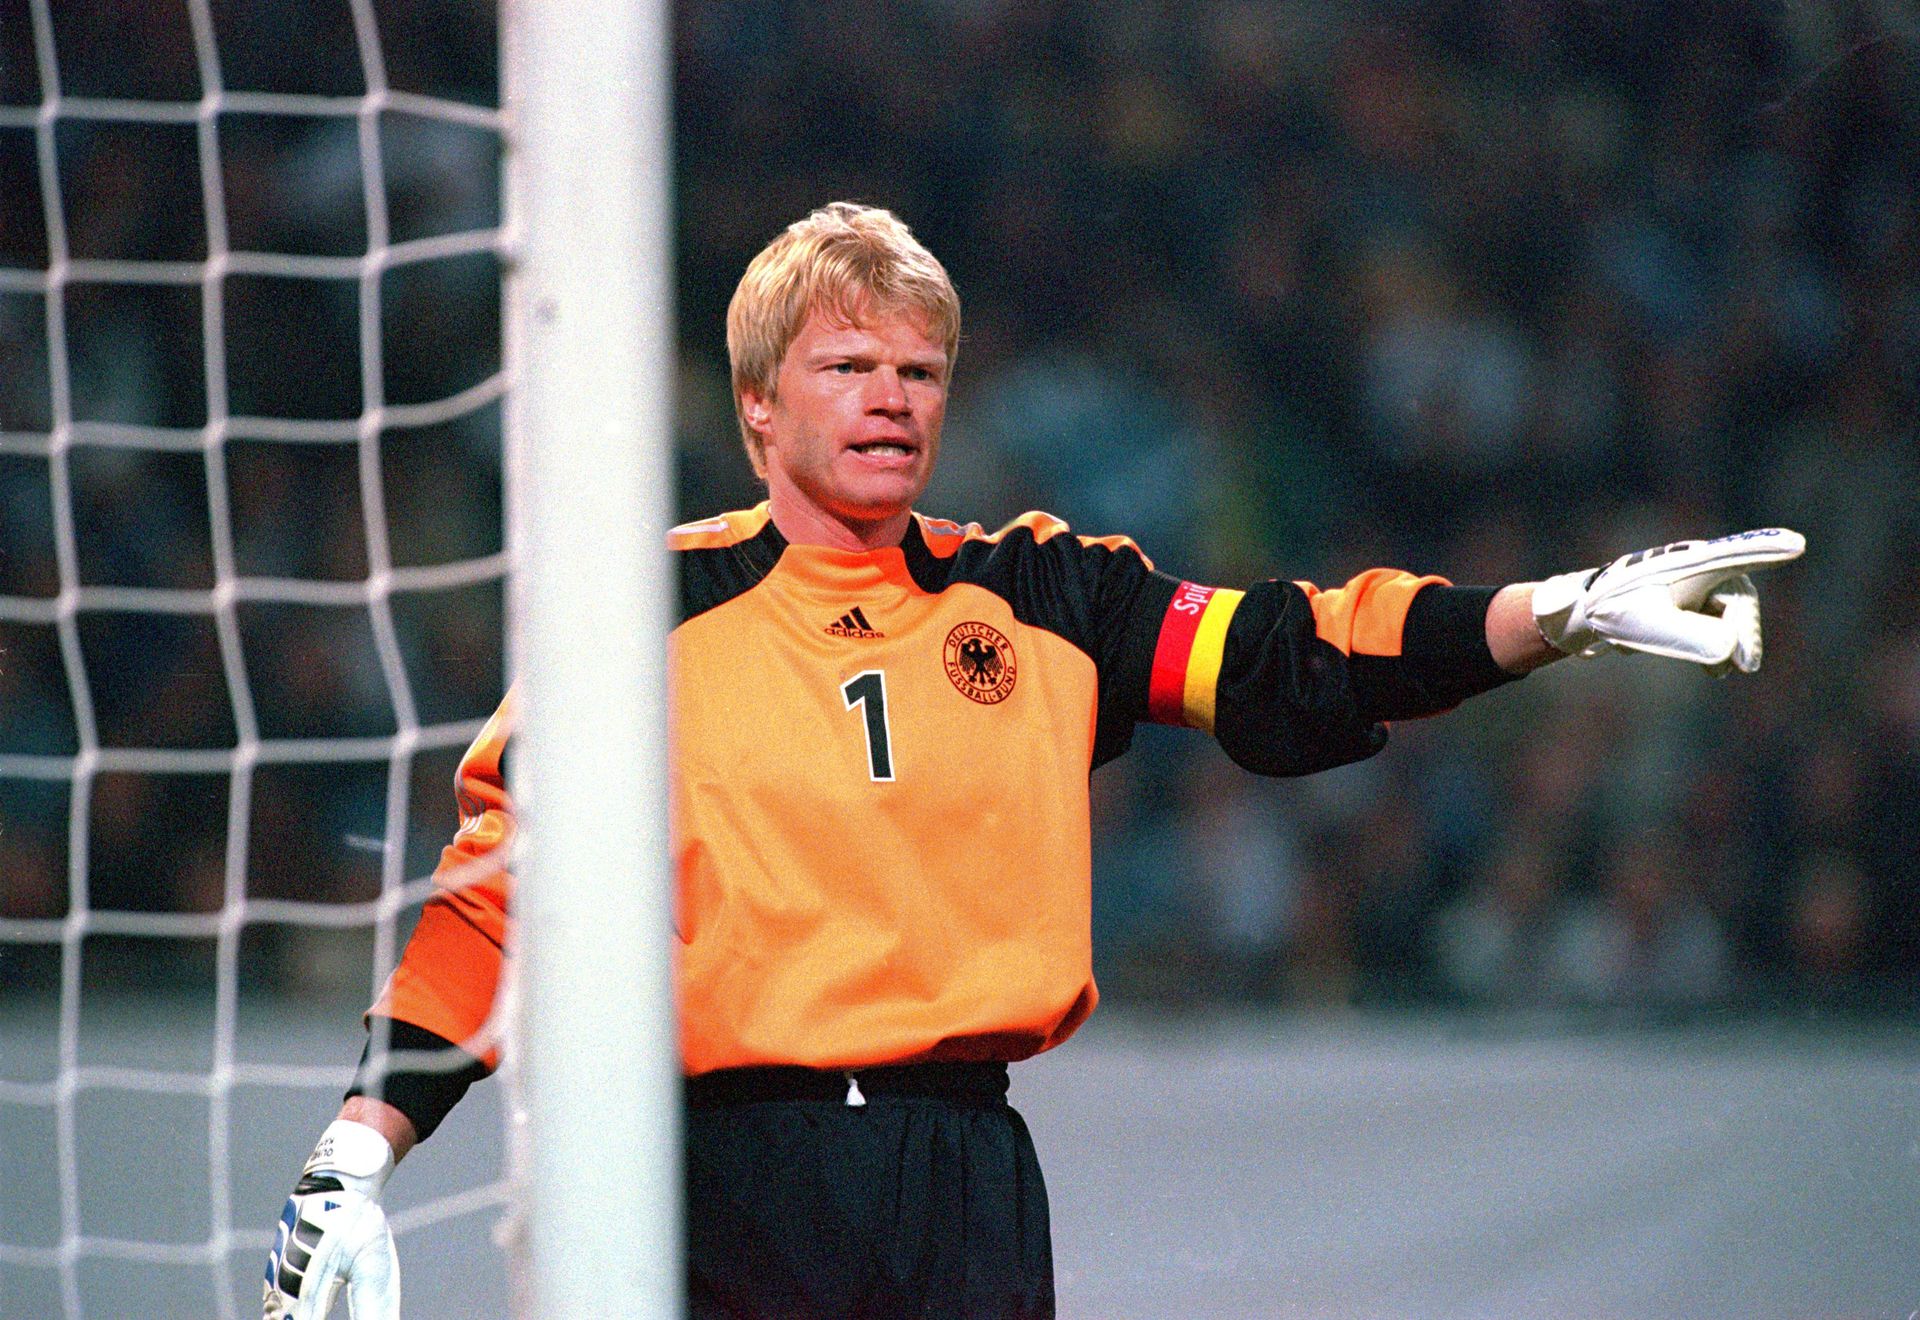 <p>                     Oliver Kahn won the World Cup Golden Ball in 2002 for his role in leading an average Germany side all the way to the final. He later made a mistake against Brazil which cost a goal, but was still excellent throughout the tournament.                   </p>                                      <p>                     A year earlier, he was the hero for Bayern Munich in a Man of the Match performance as he saved three penalties against Valencia in the Champions League final. Named world's best goalkeeper in 2001 and 2002 by IFFHS, Kahn won 86 caps for Germany and is considered one of the greatest of all time.                   </p>